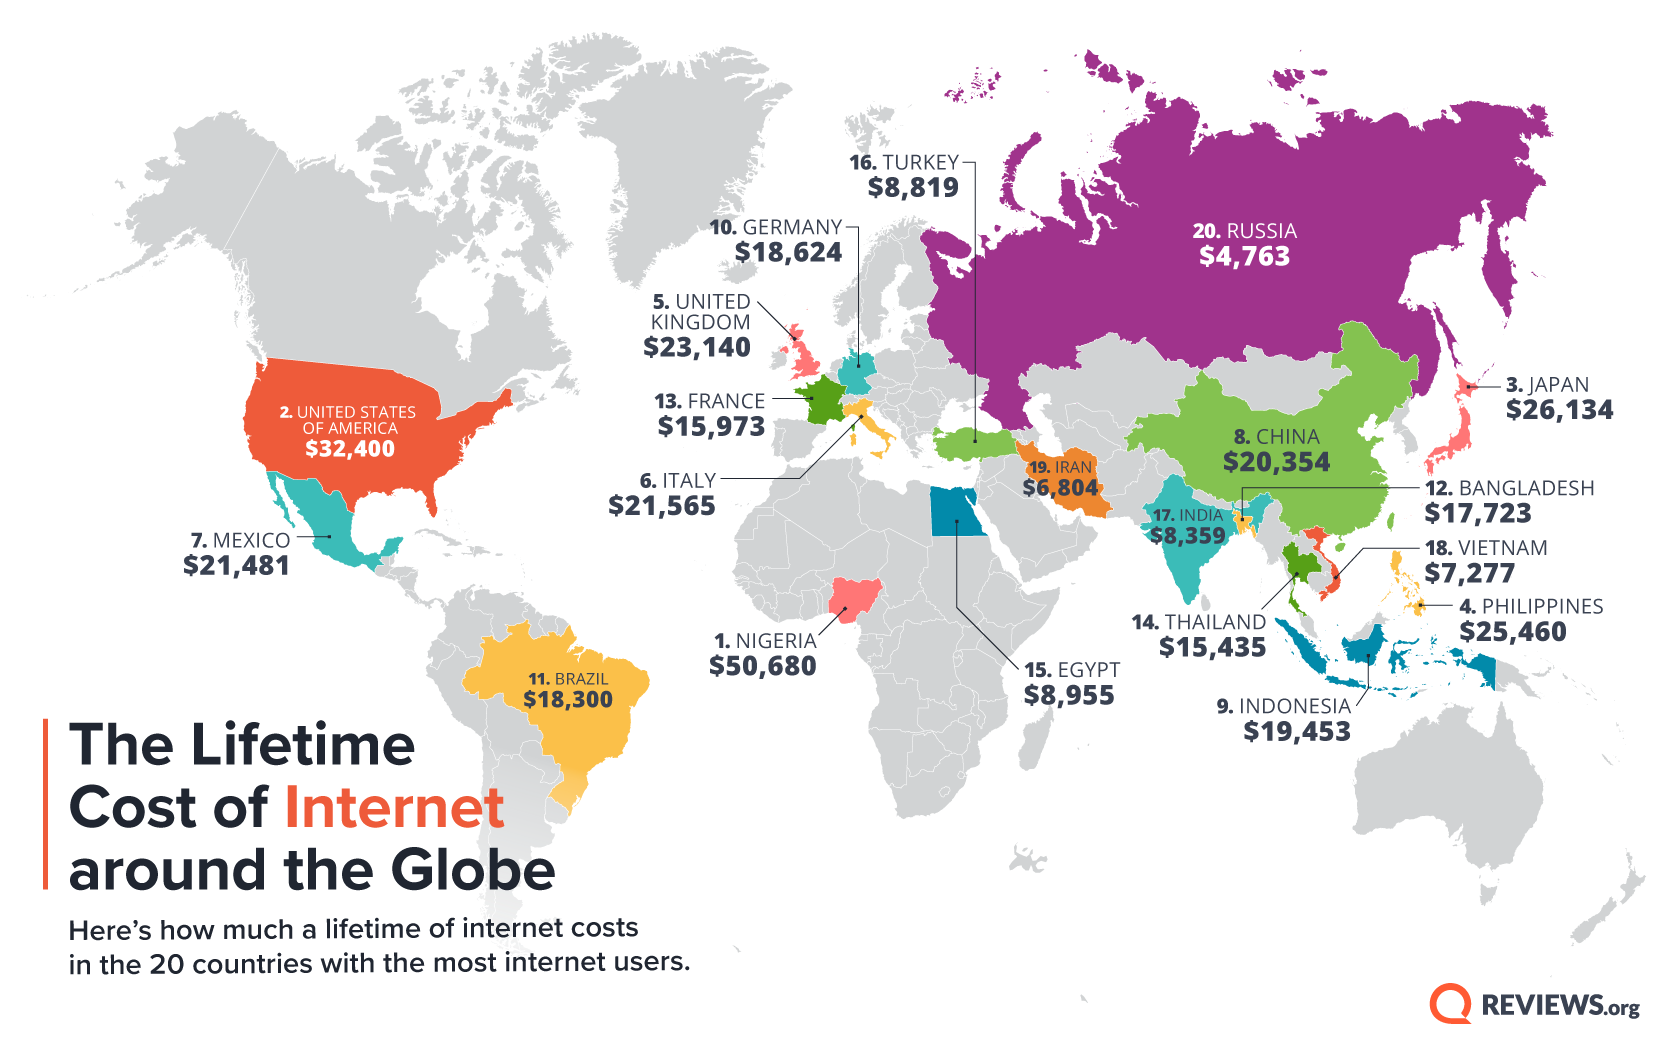 The Lifetime Cost of Internet around the Globe